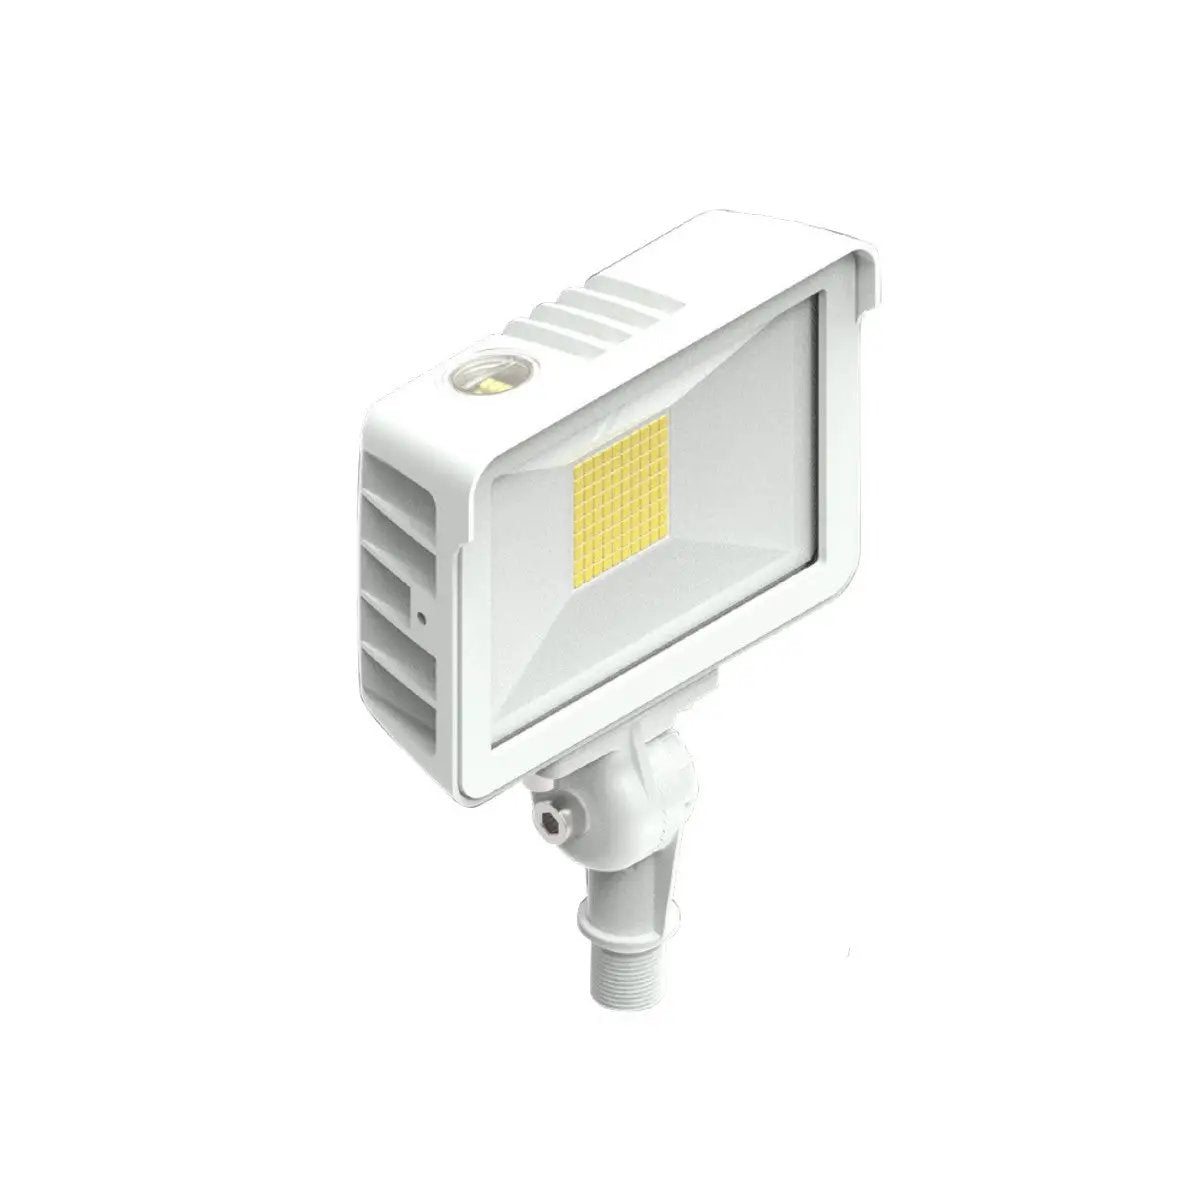 Outdoor Flood Lighting Fixture - A close-up of a light with adjustable color temperature and universal mounting options. Provides 2175 lumens of bright LED light. Energy-saving dusk-to-dawn photocell included. UL Listed, IP65 Rated, and DLC Premium Listed.